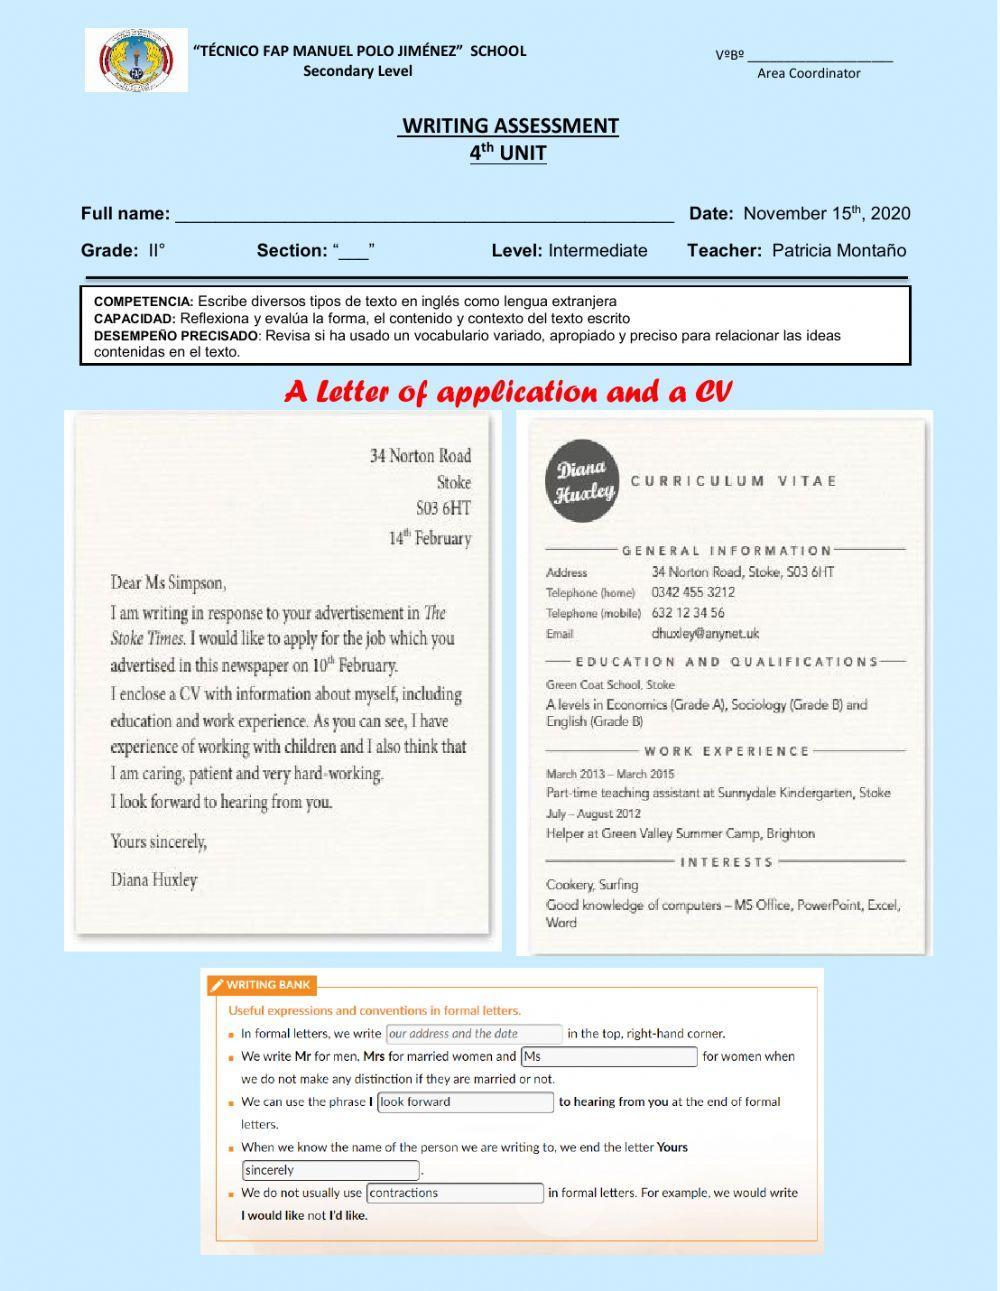 A letter of application and a cv